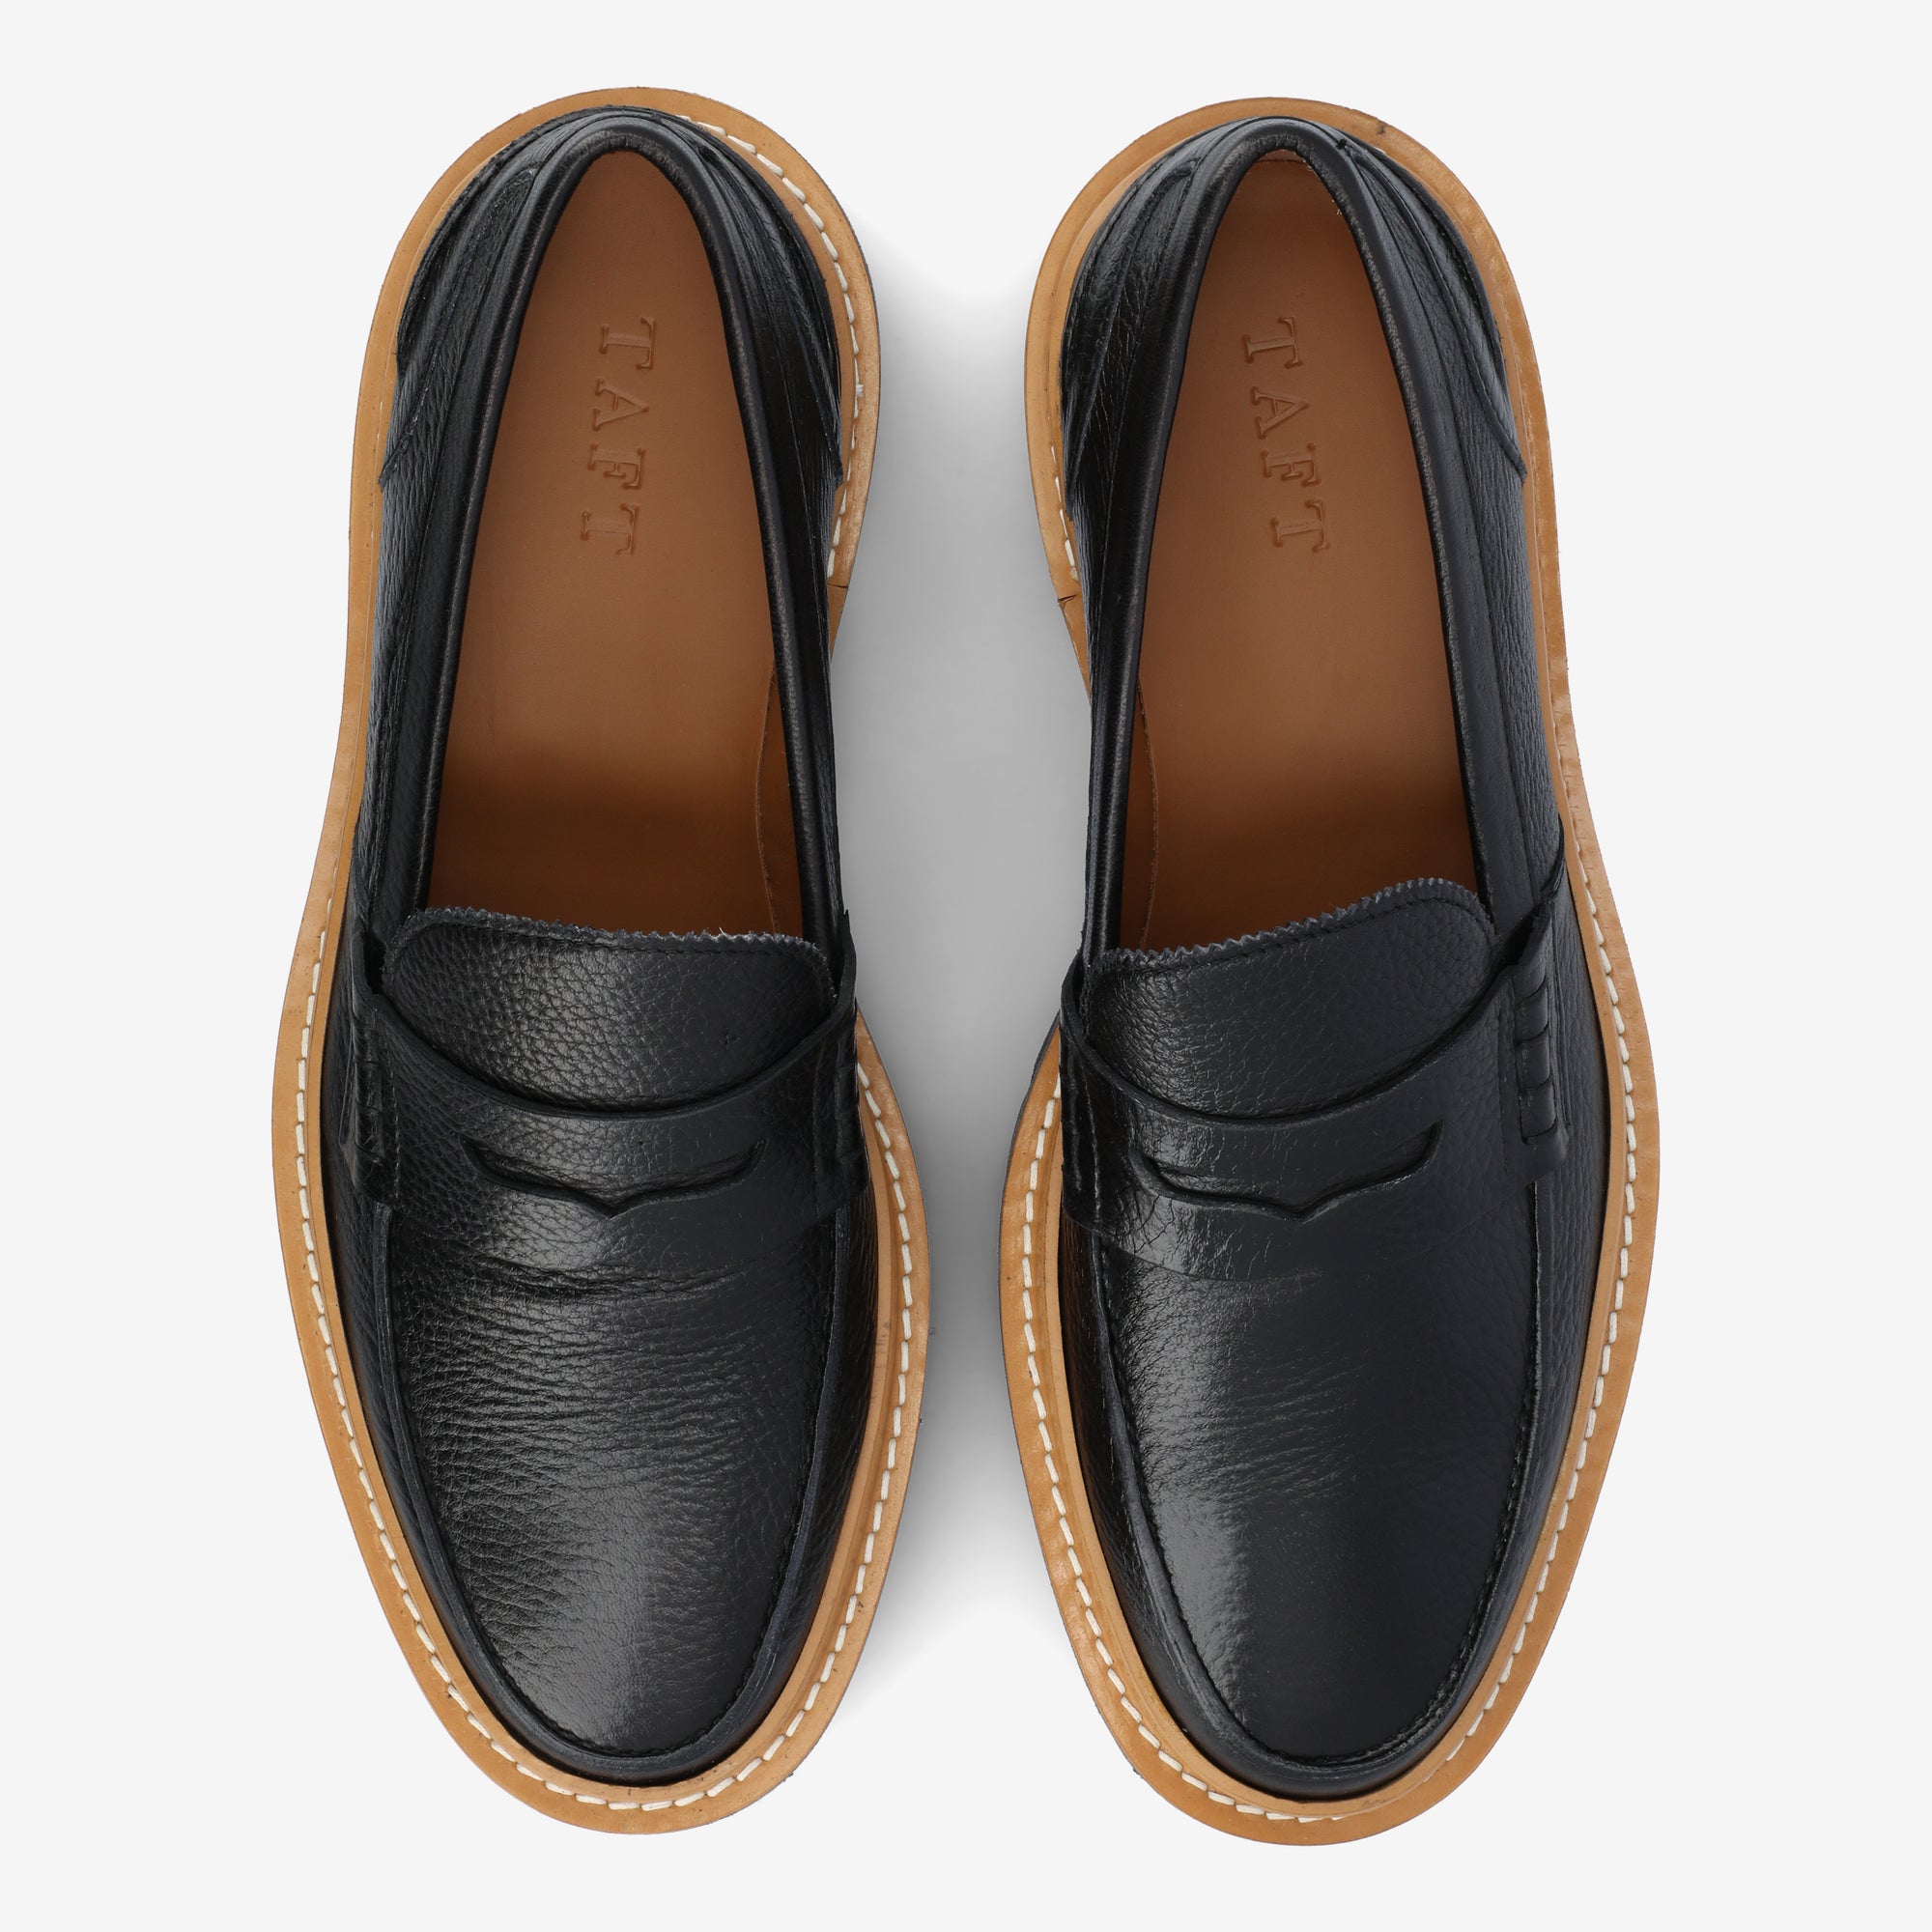 The Country Loafer in Black